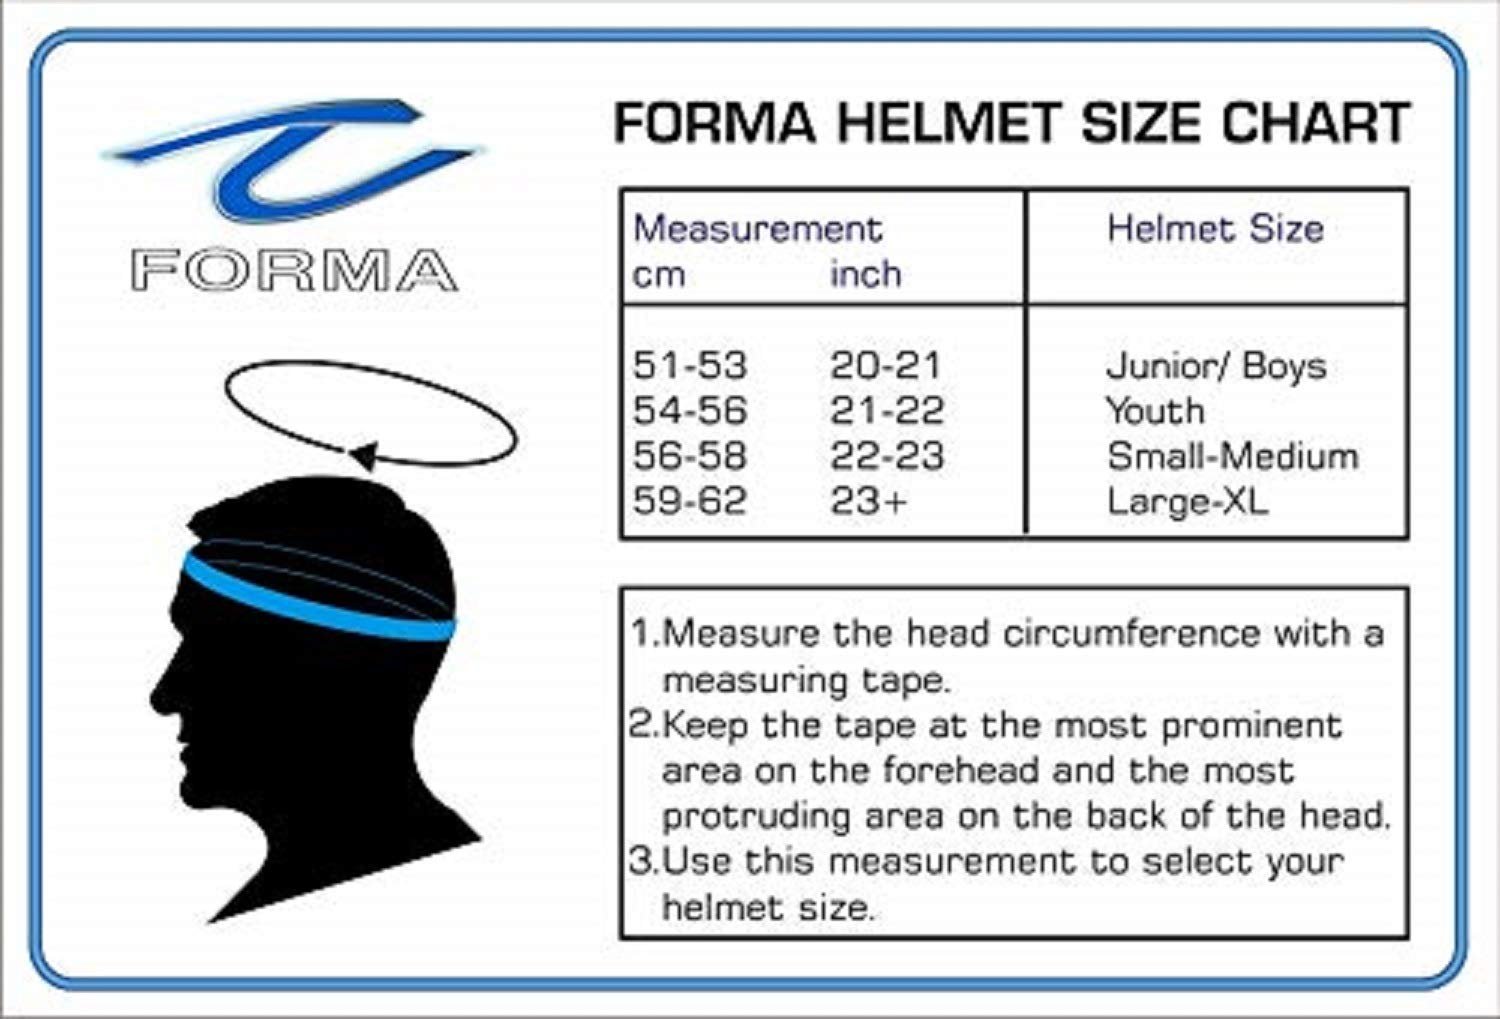 FORMA AIR CROSS PRO MAXX TNM Pre-fitted Faceguard Impact-Reducing Foam for Enhanced Safety and Comfort